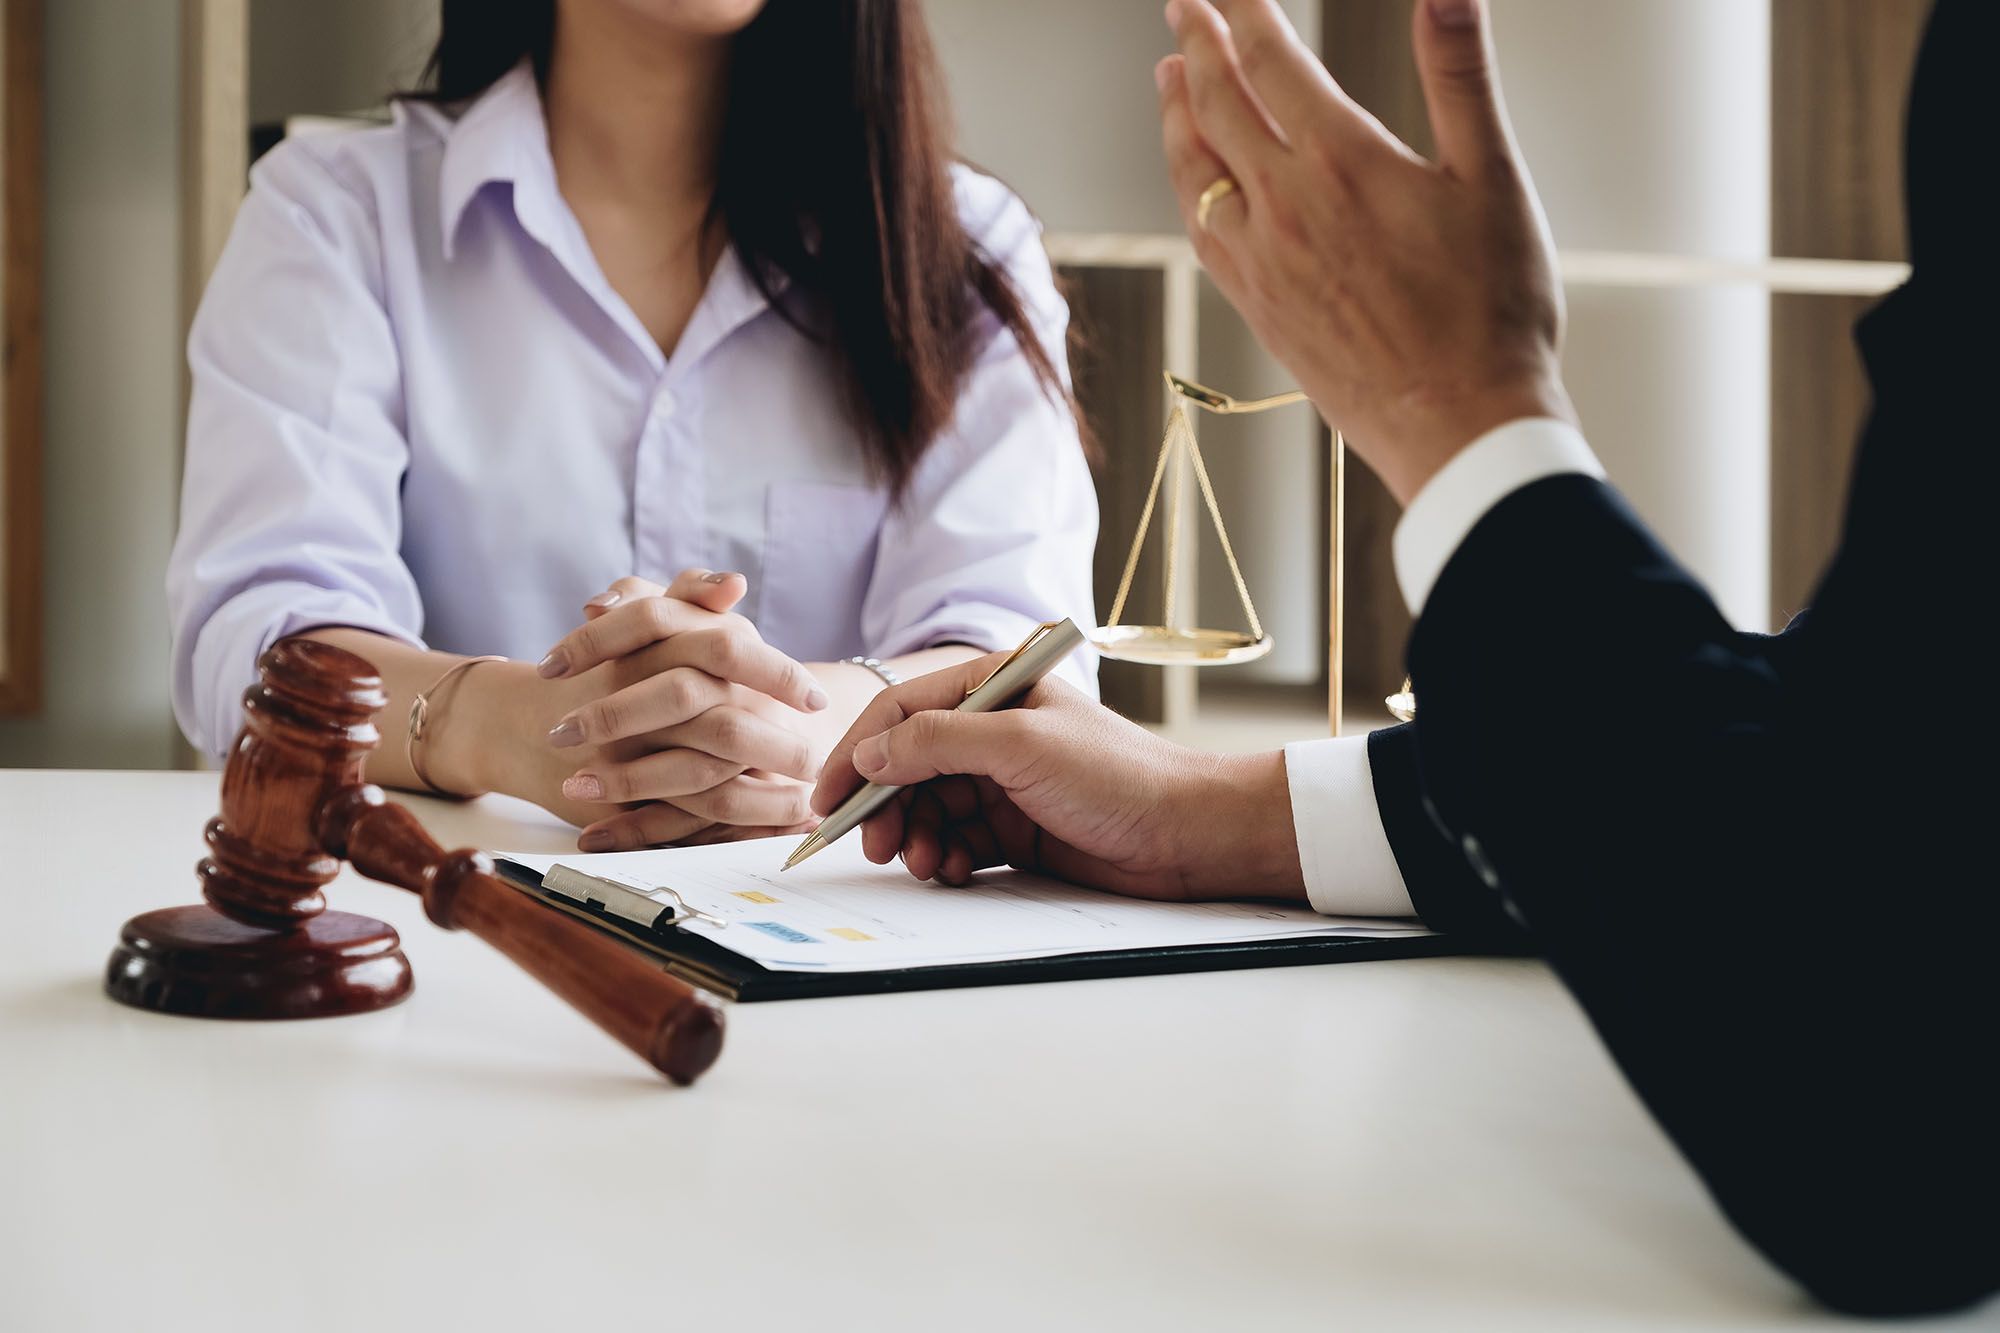 6 Questions to Ask During Legal Consultations